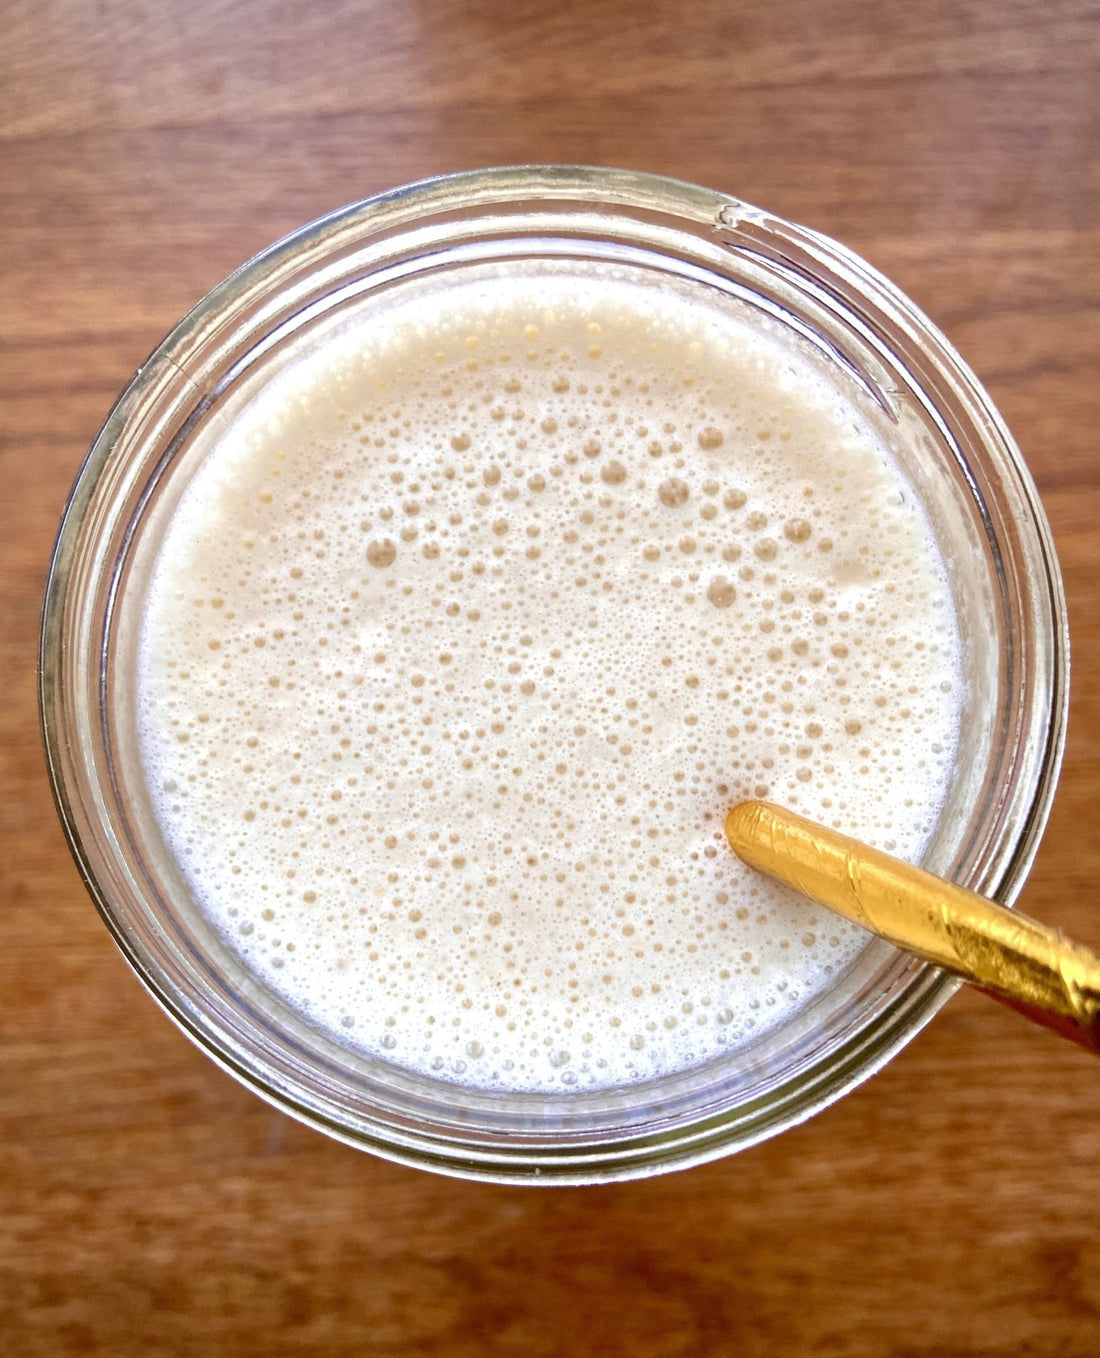 Bariatric Recipes - Apples and Peanut Butter Protein Shake - Bariatric Fusion